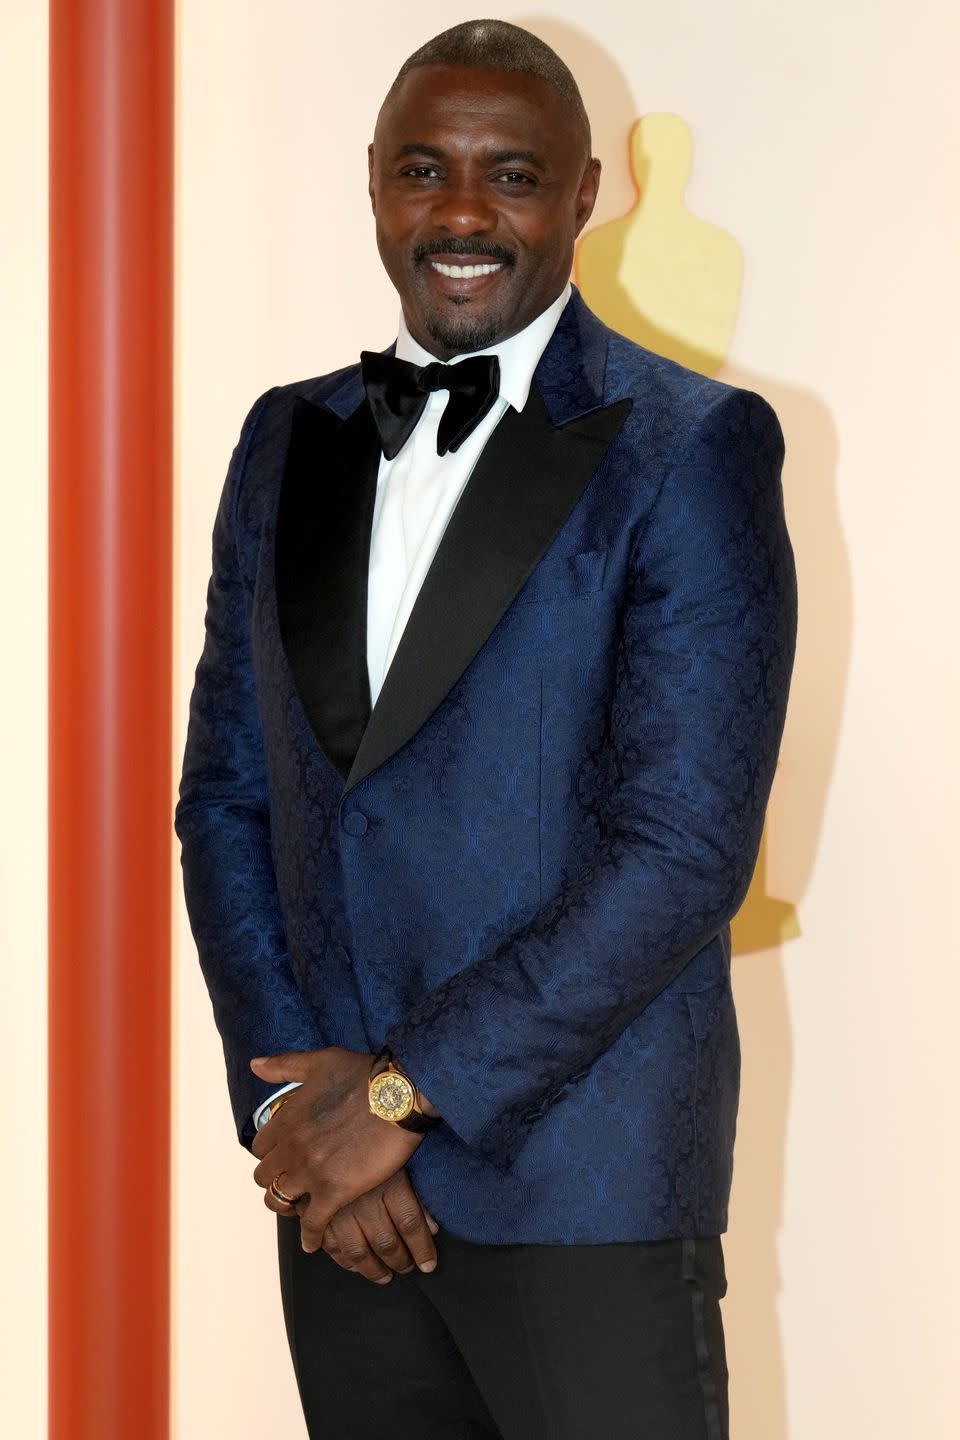 idris elba stands with hands clasped in front and smiling at the camera, closely shaved head with dark hair, wearing a blue tuxedo jacket with black trousers and bow tie and white shirt